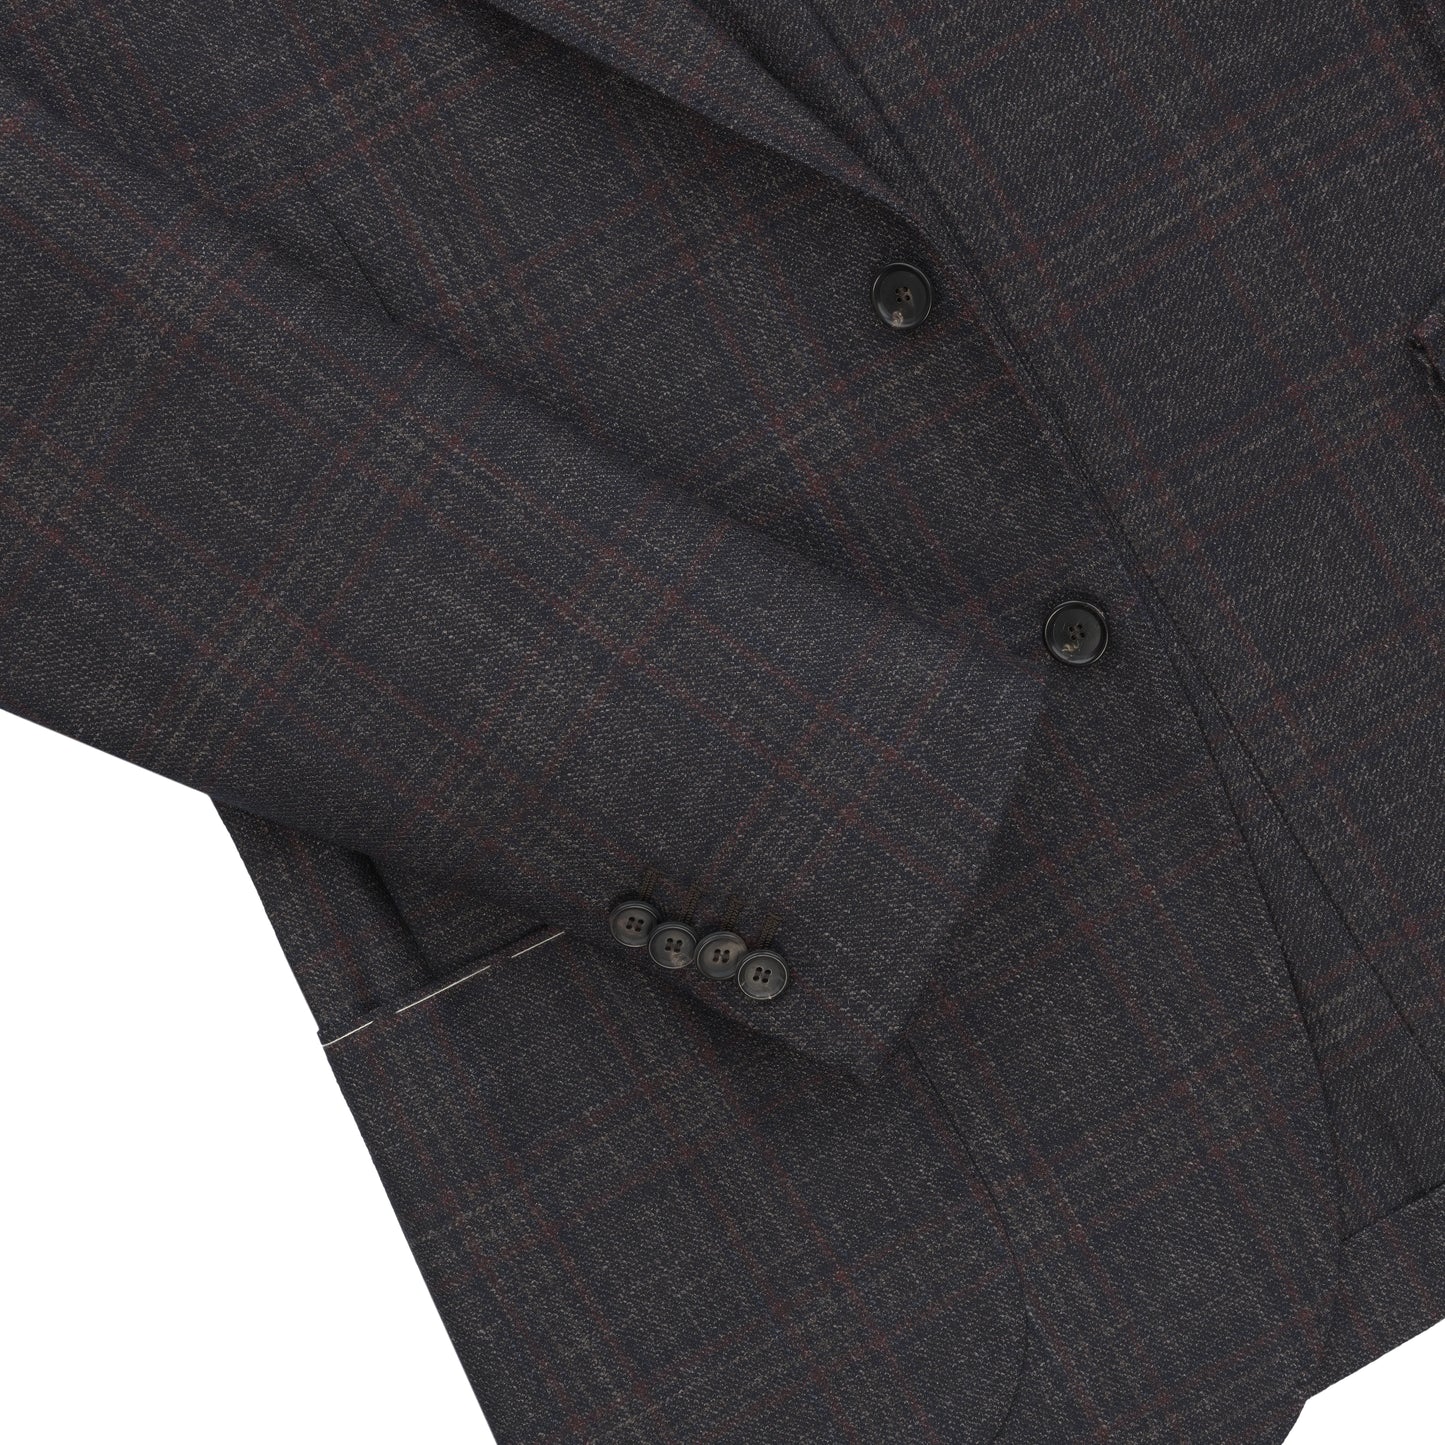 Single-Breasted Wool Jacket in Granite Brown and Red. Exclusively Made for Sartale